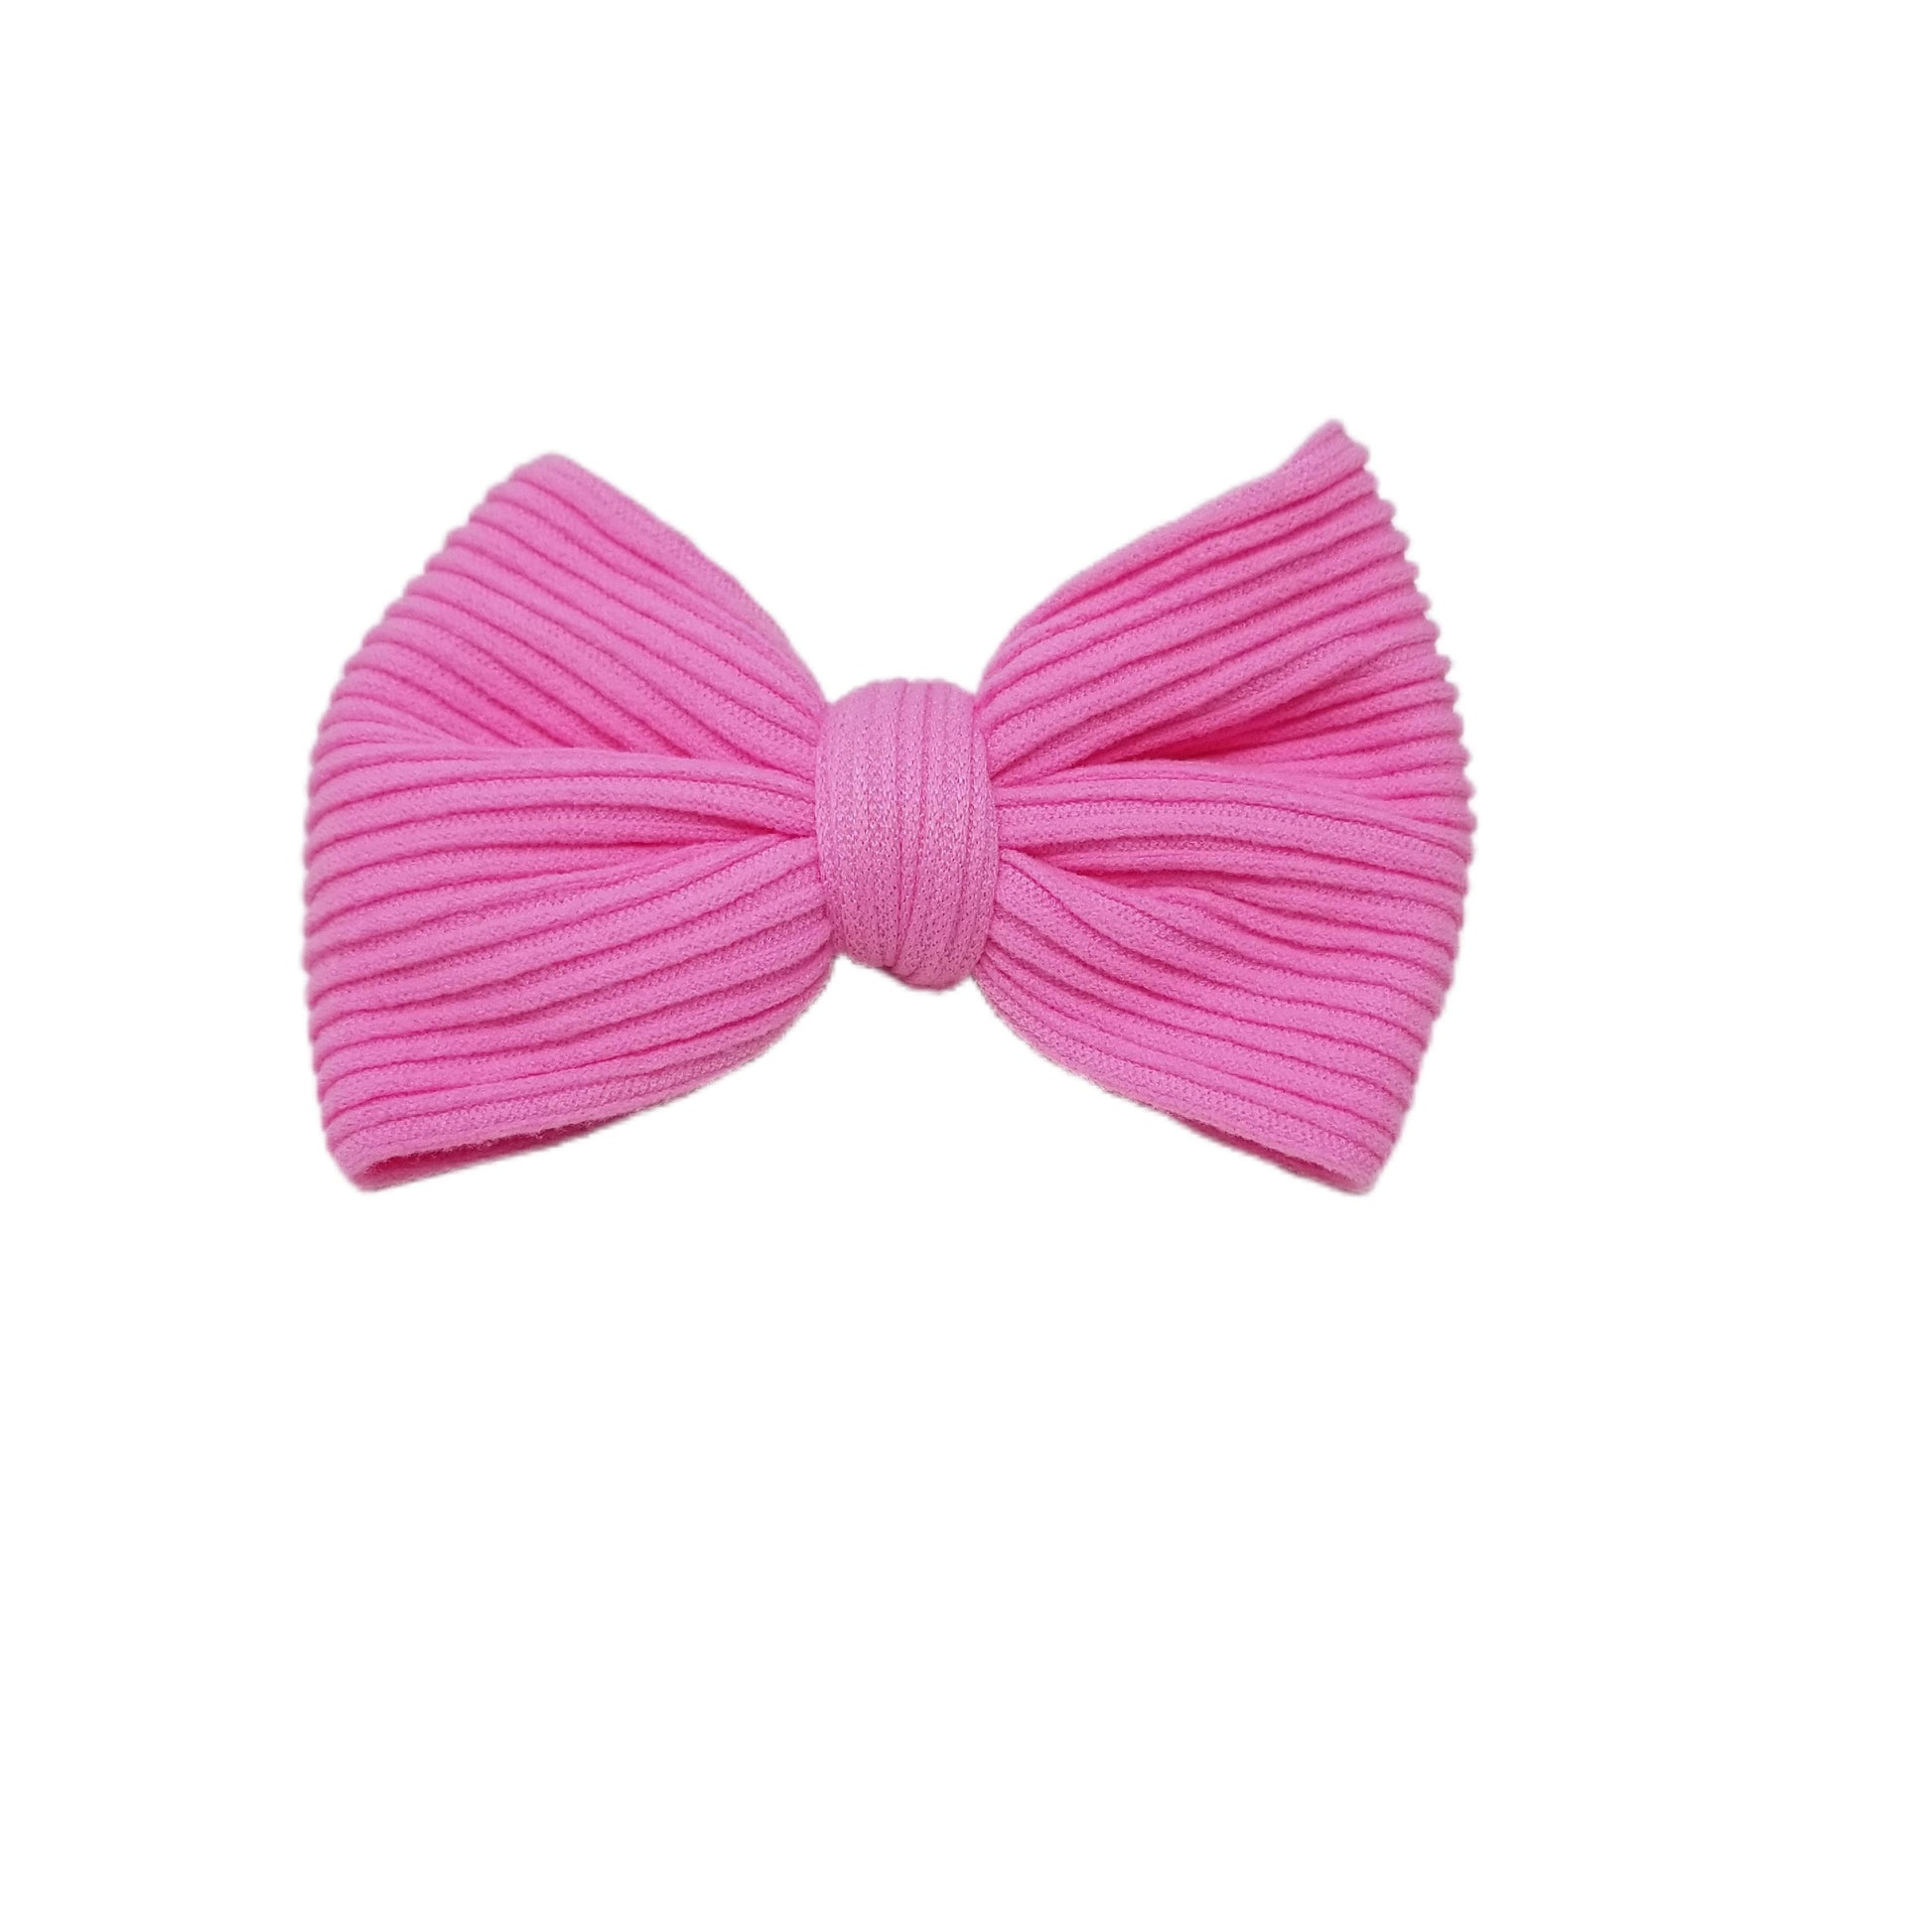 Ribbed Knit Nylon Bow 4" - Waterfall Wishes